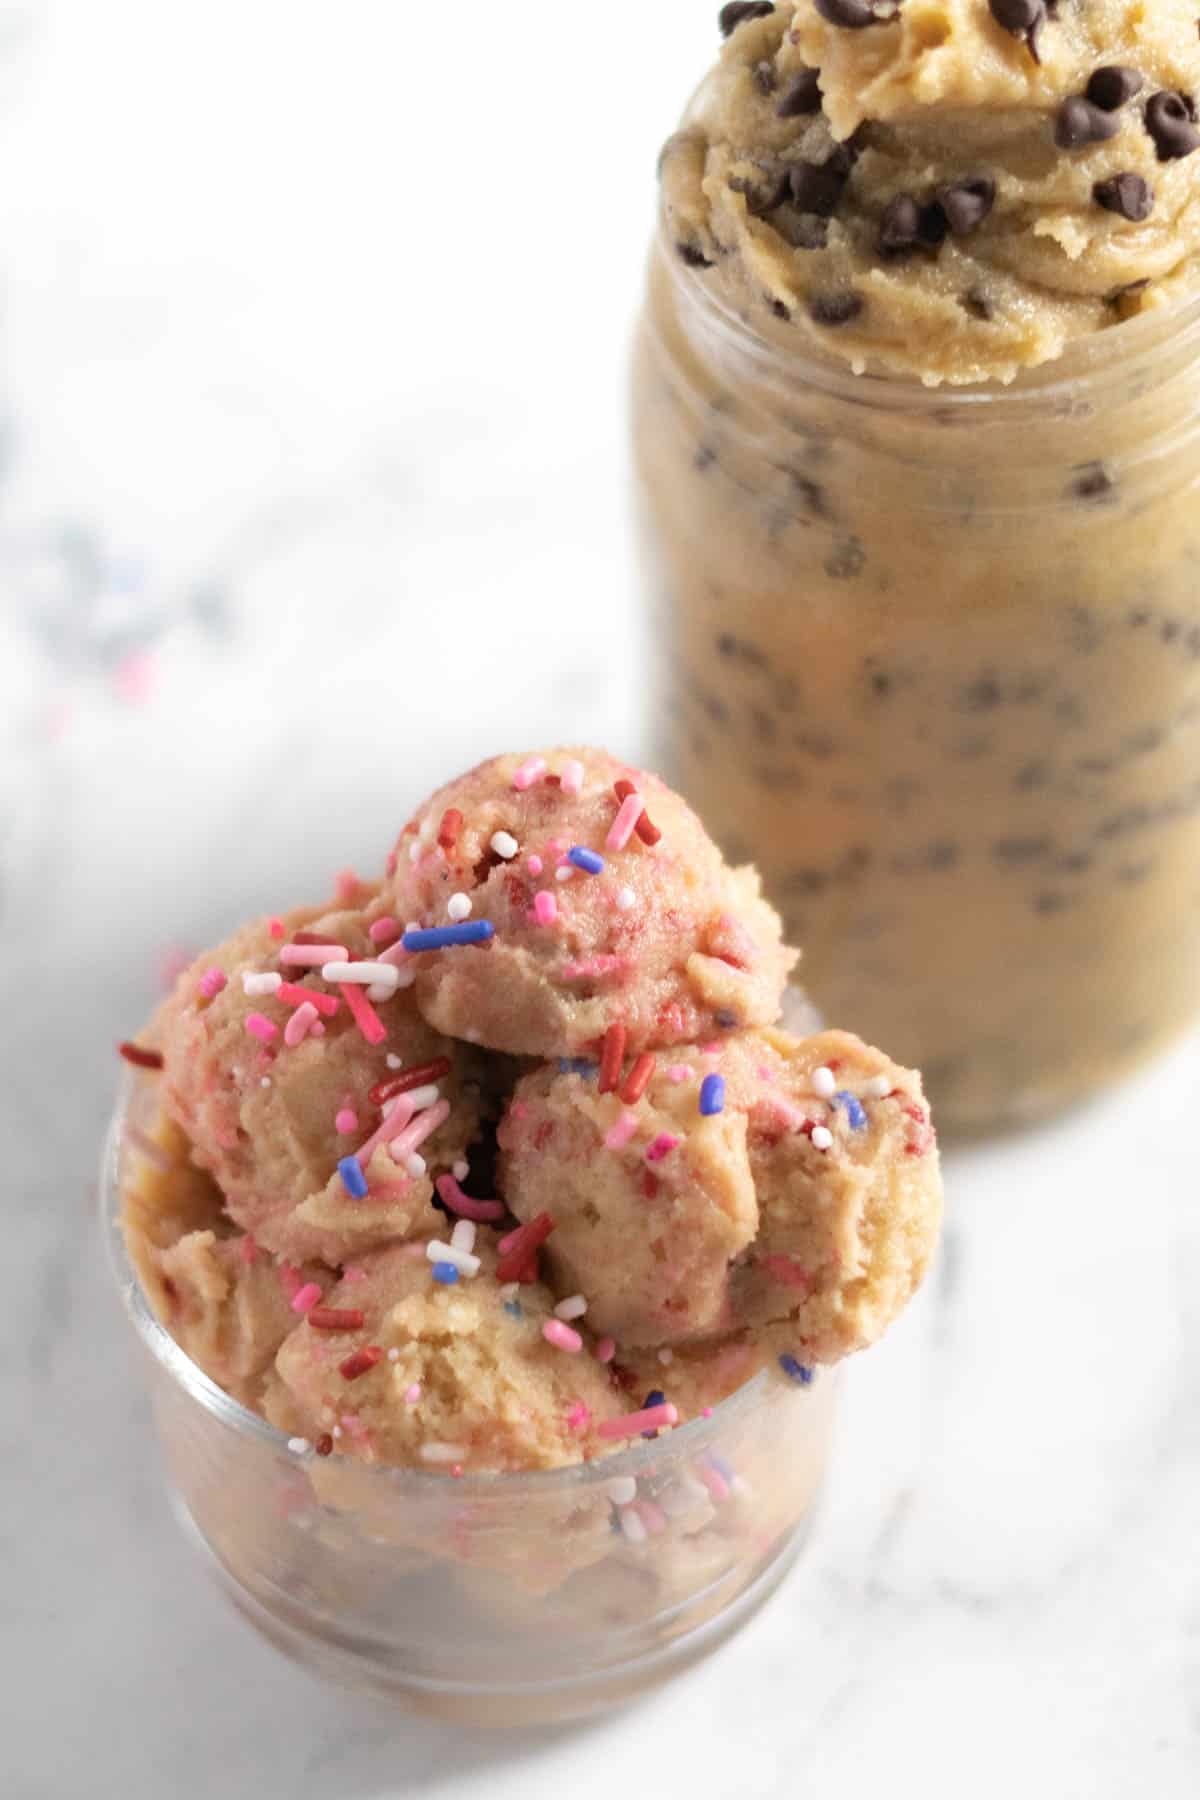 Cookie dough with colorful sprinkles.